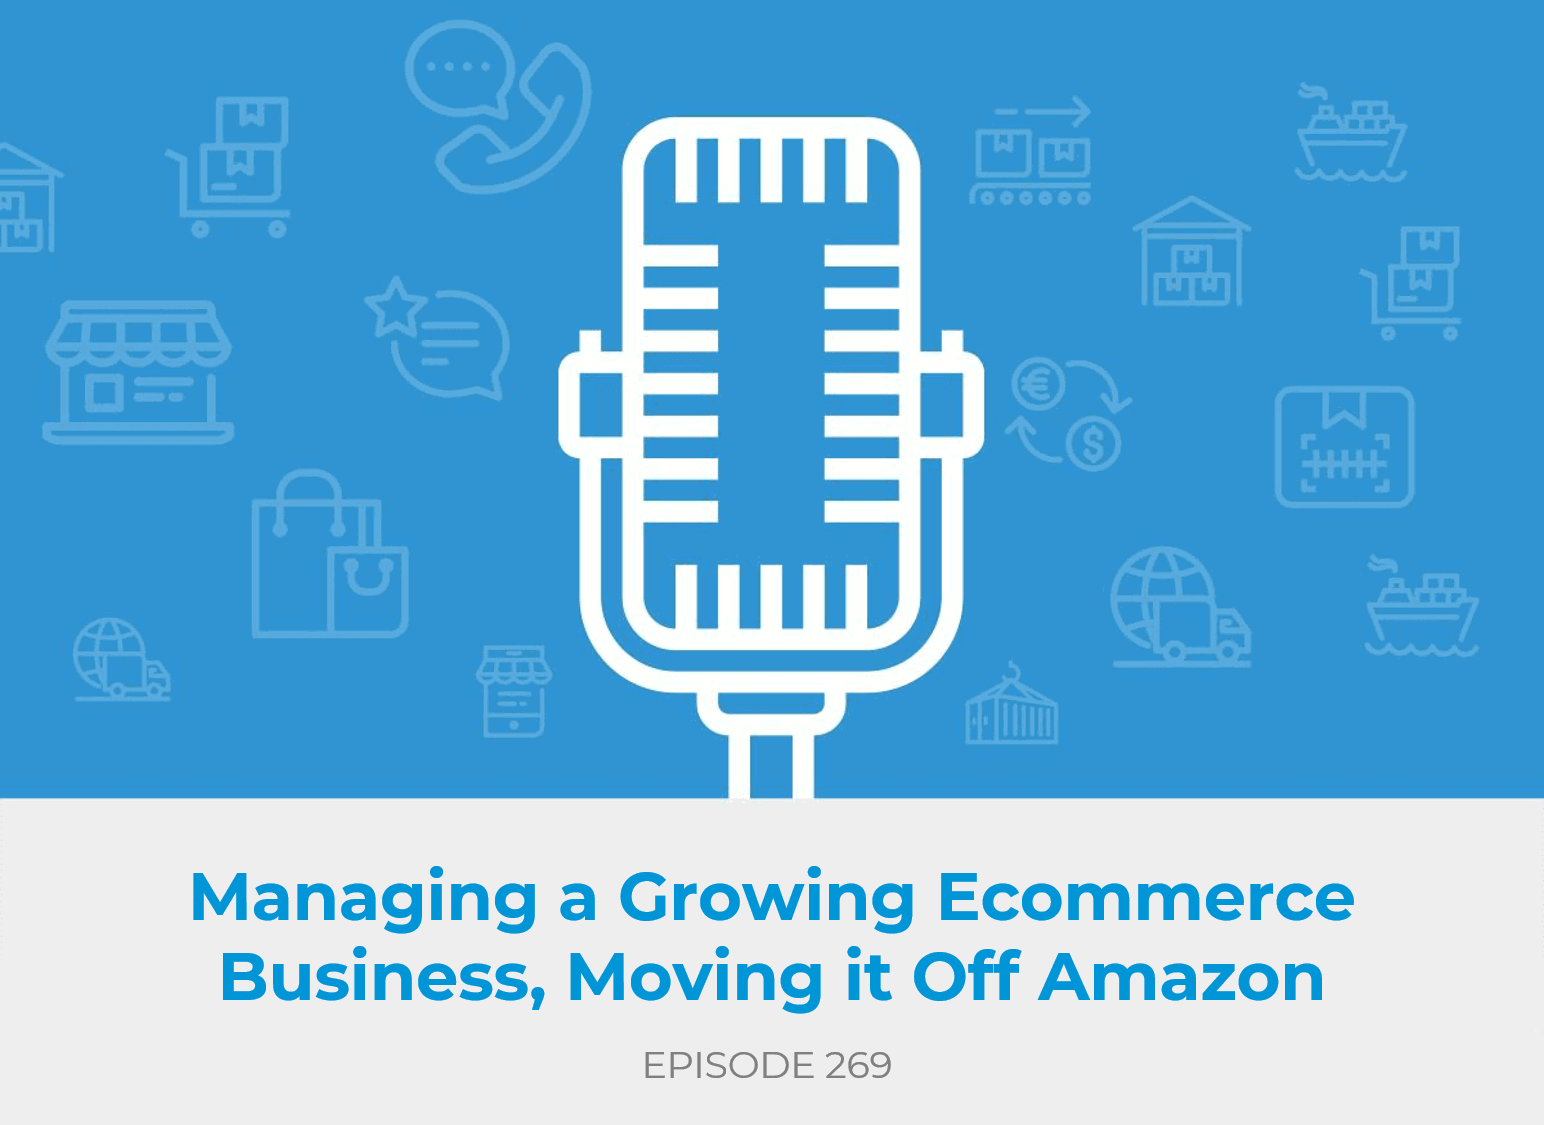 Managing a Growing Ecommerce Business, Moving it Off Amazon